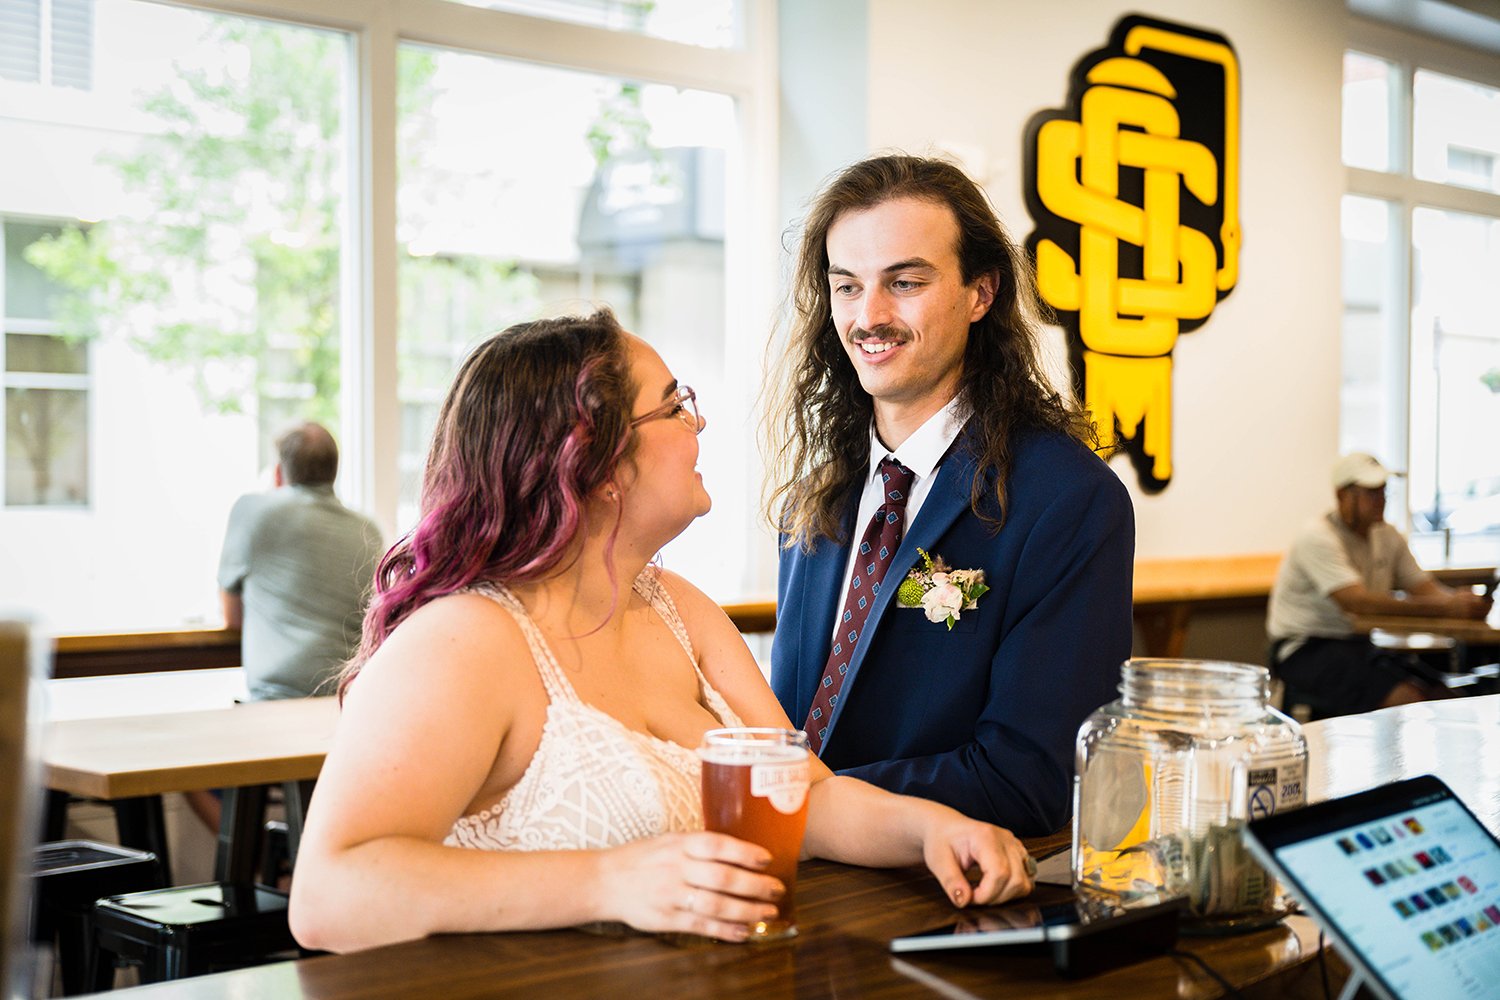 A newlywed couple order beers at Olde Salem Brewing Company.